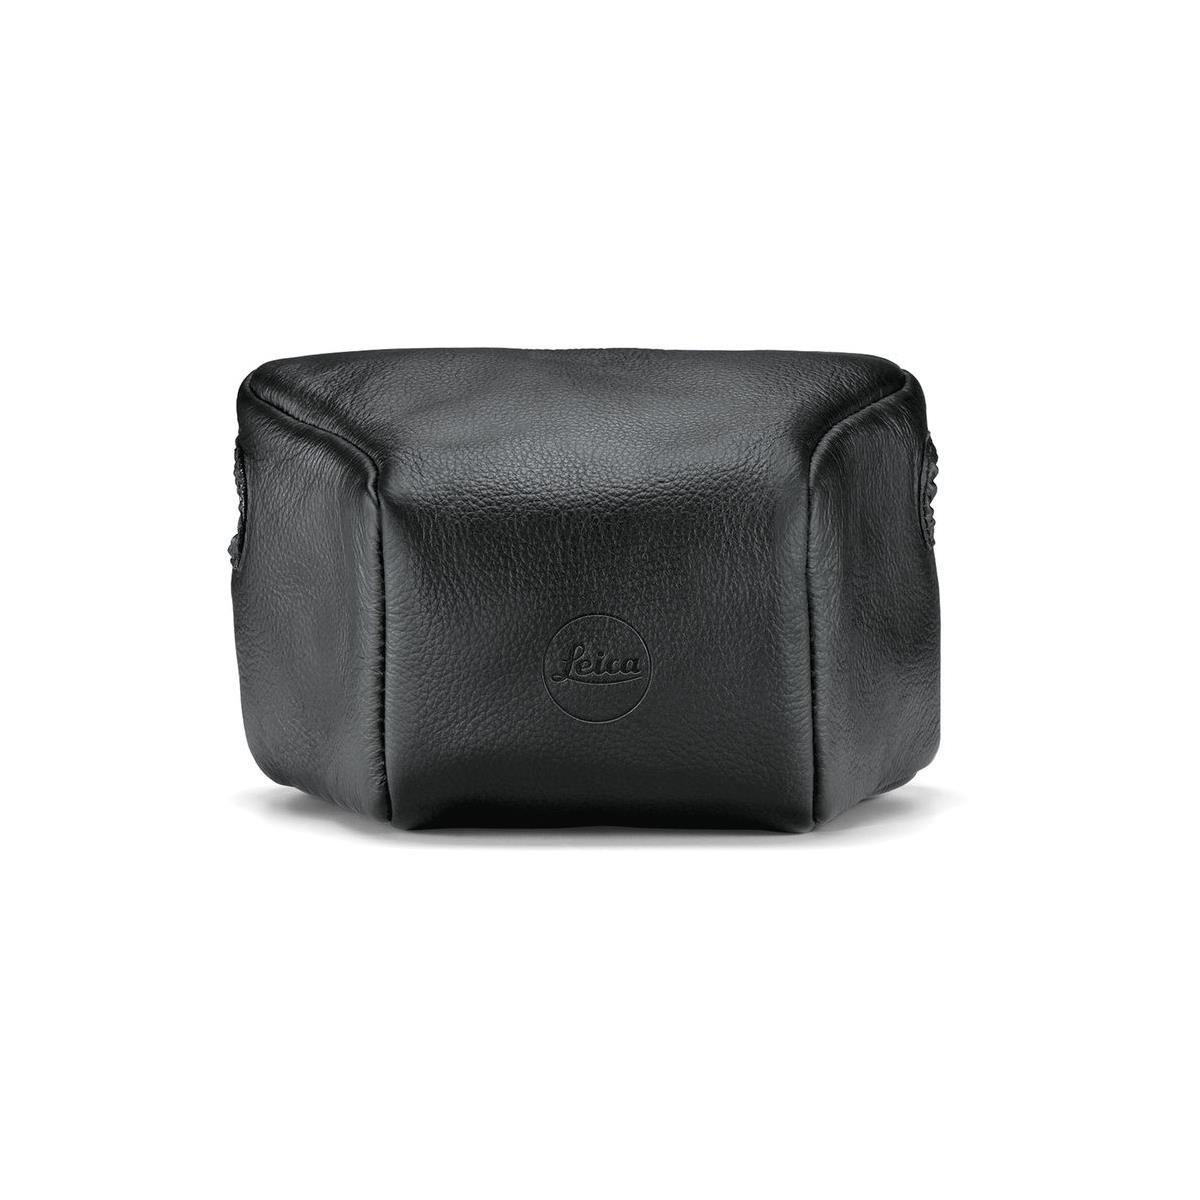 Image of Leica Leather Pouch for Leica M Cameras - Long